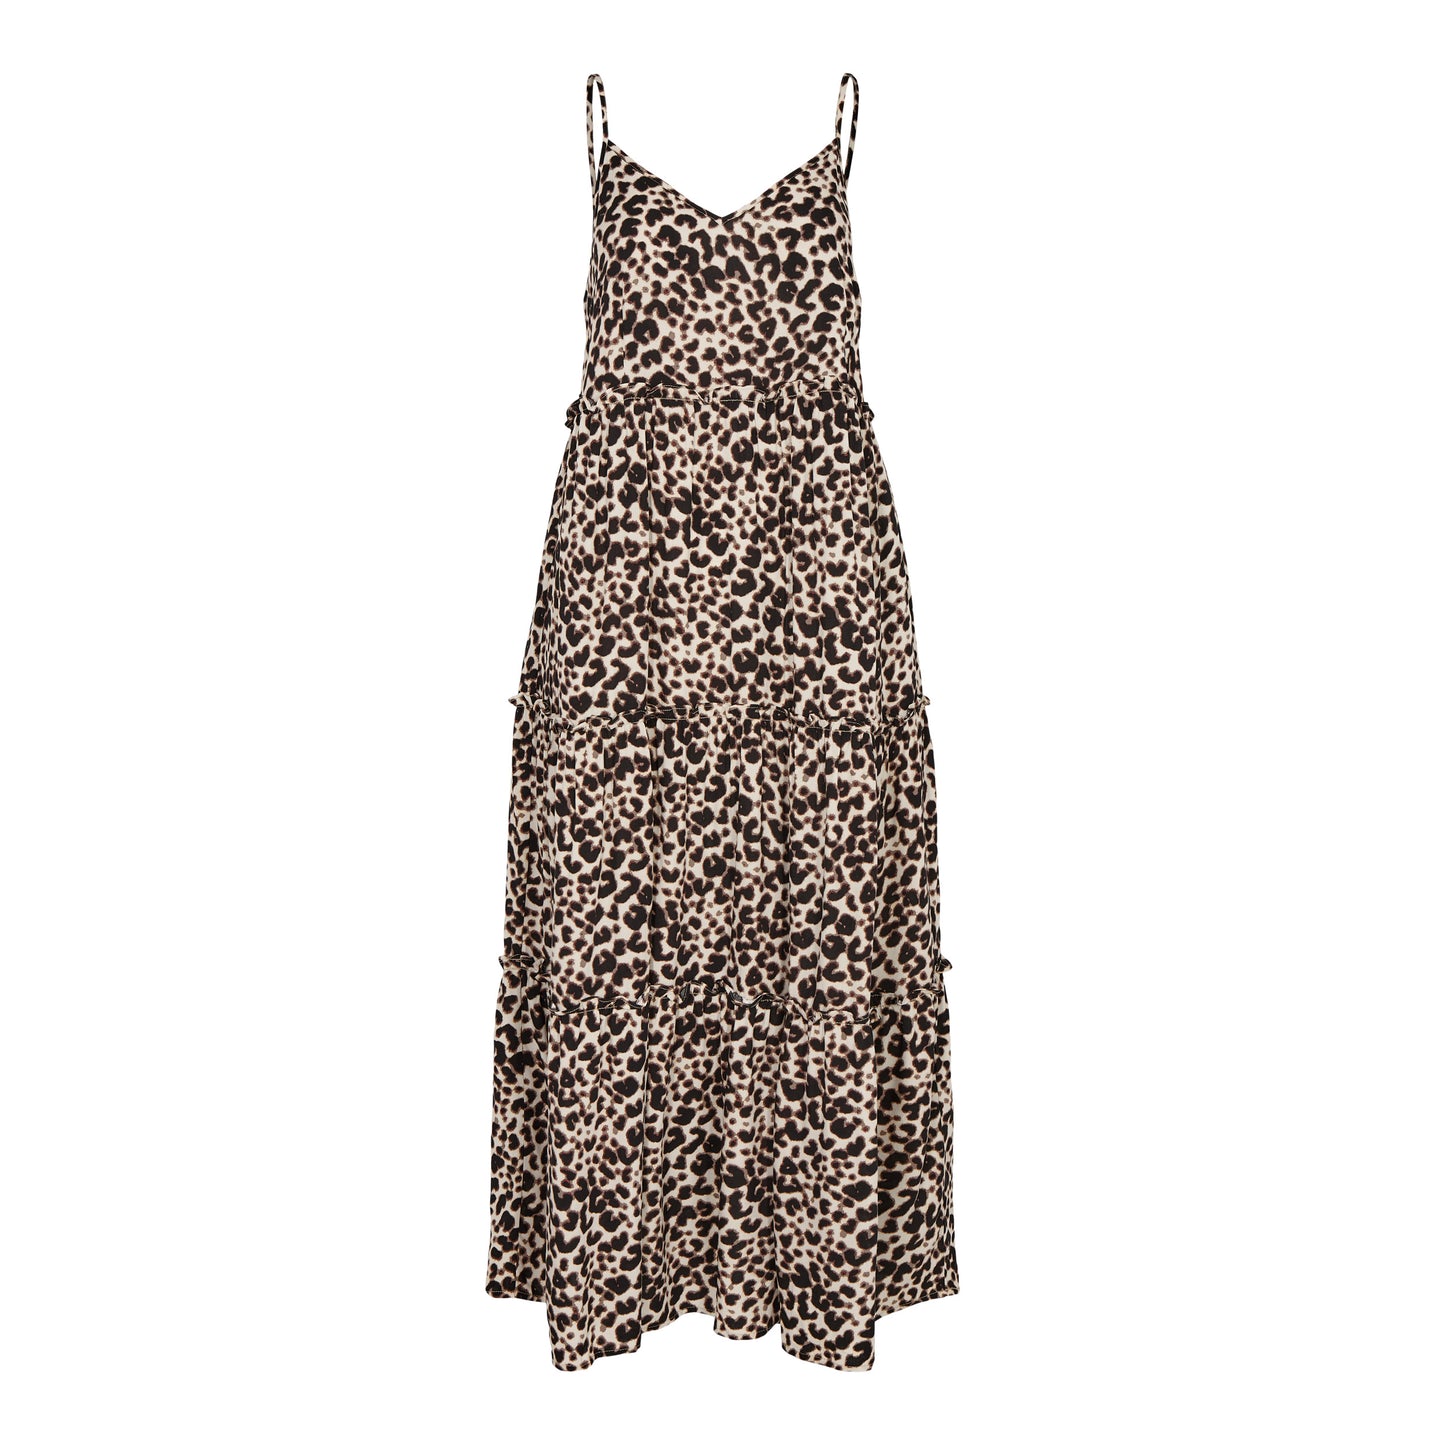 Co'couture - Adore Gipsy Animal Dress